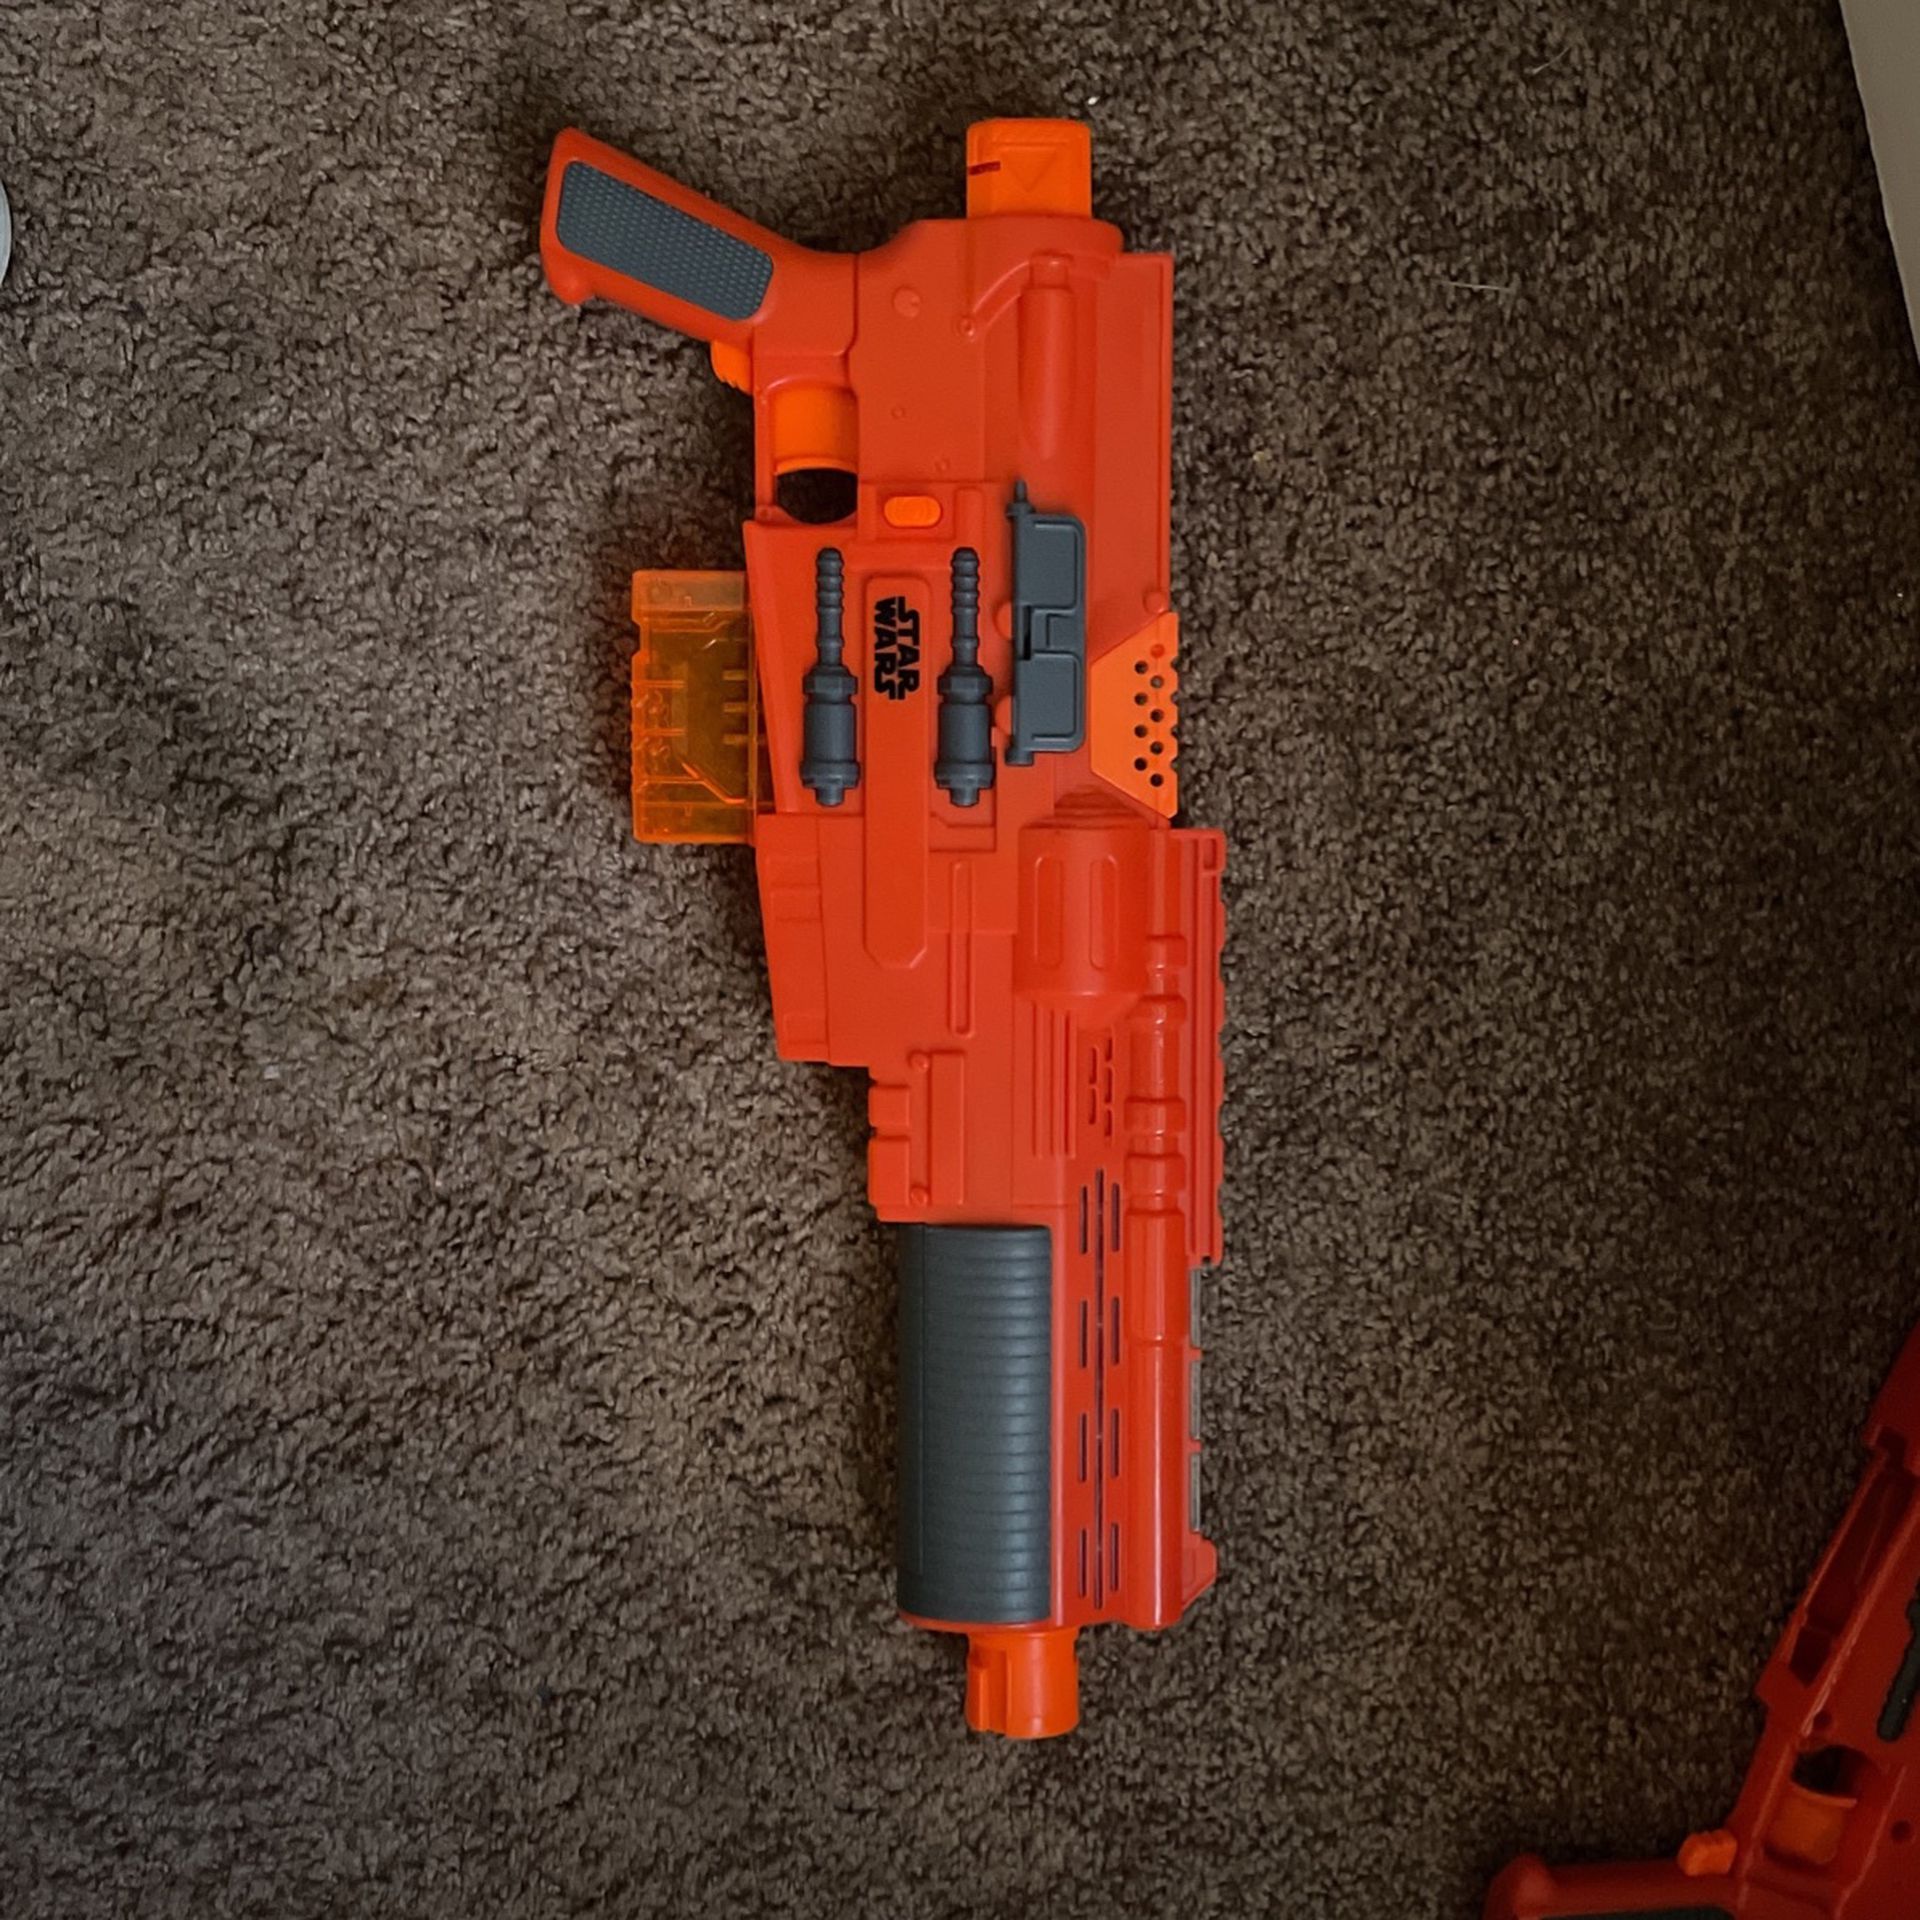 2015 Nerf Electronic Rogue One Blaster